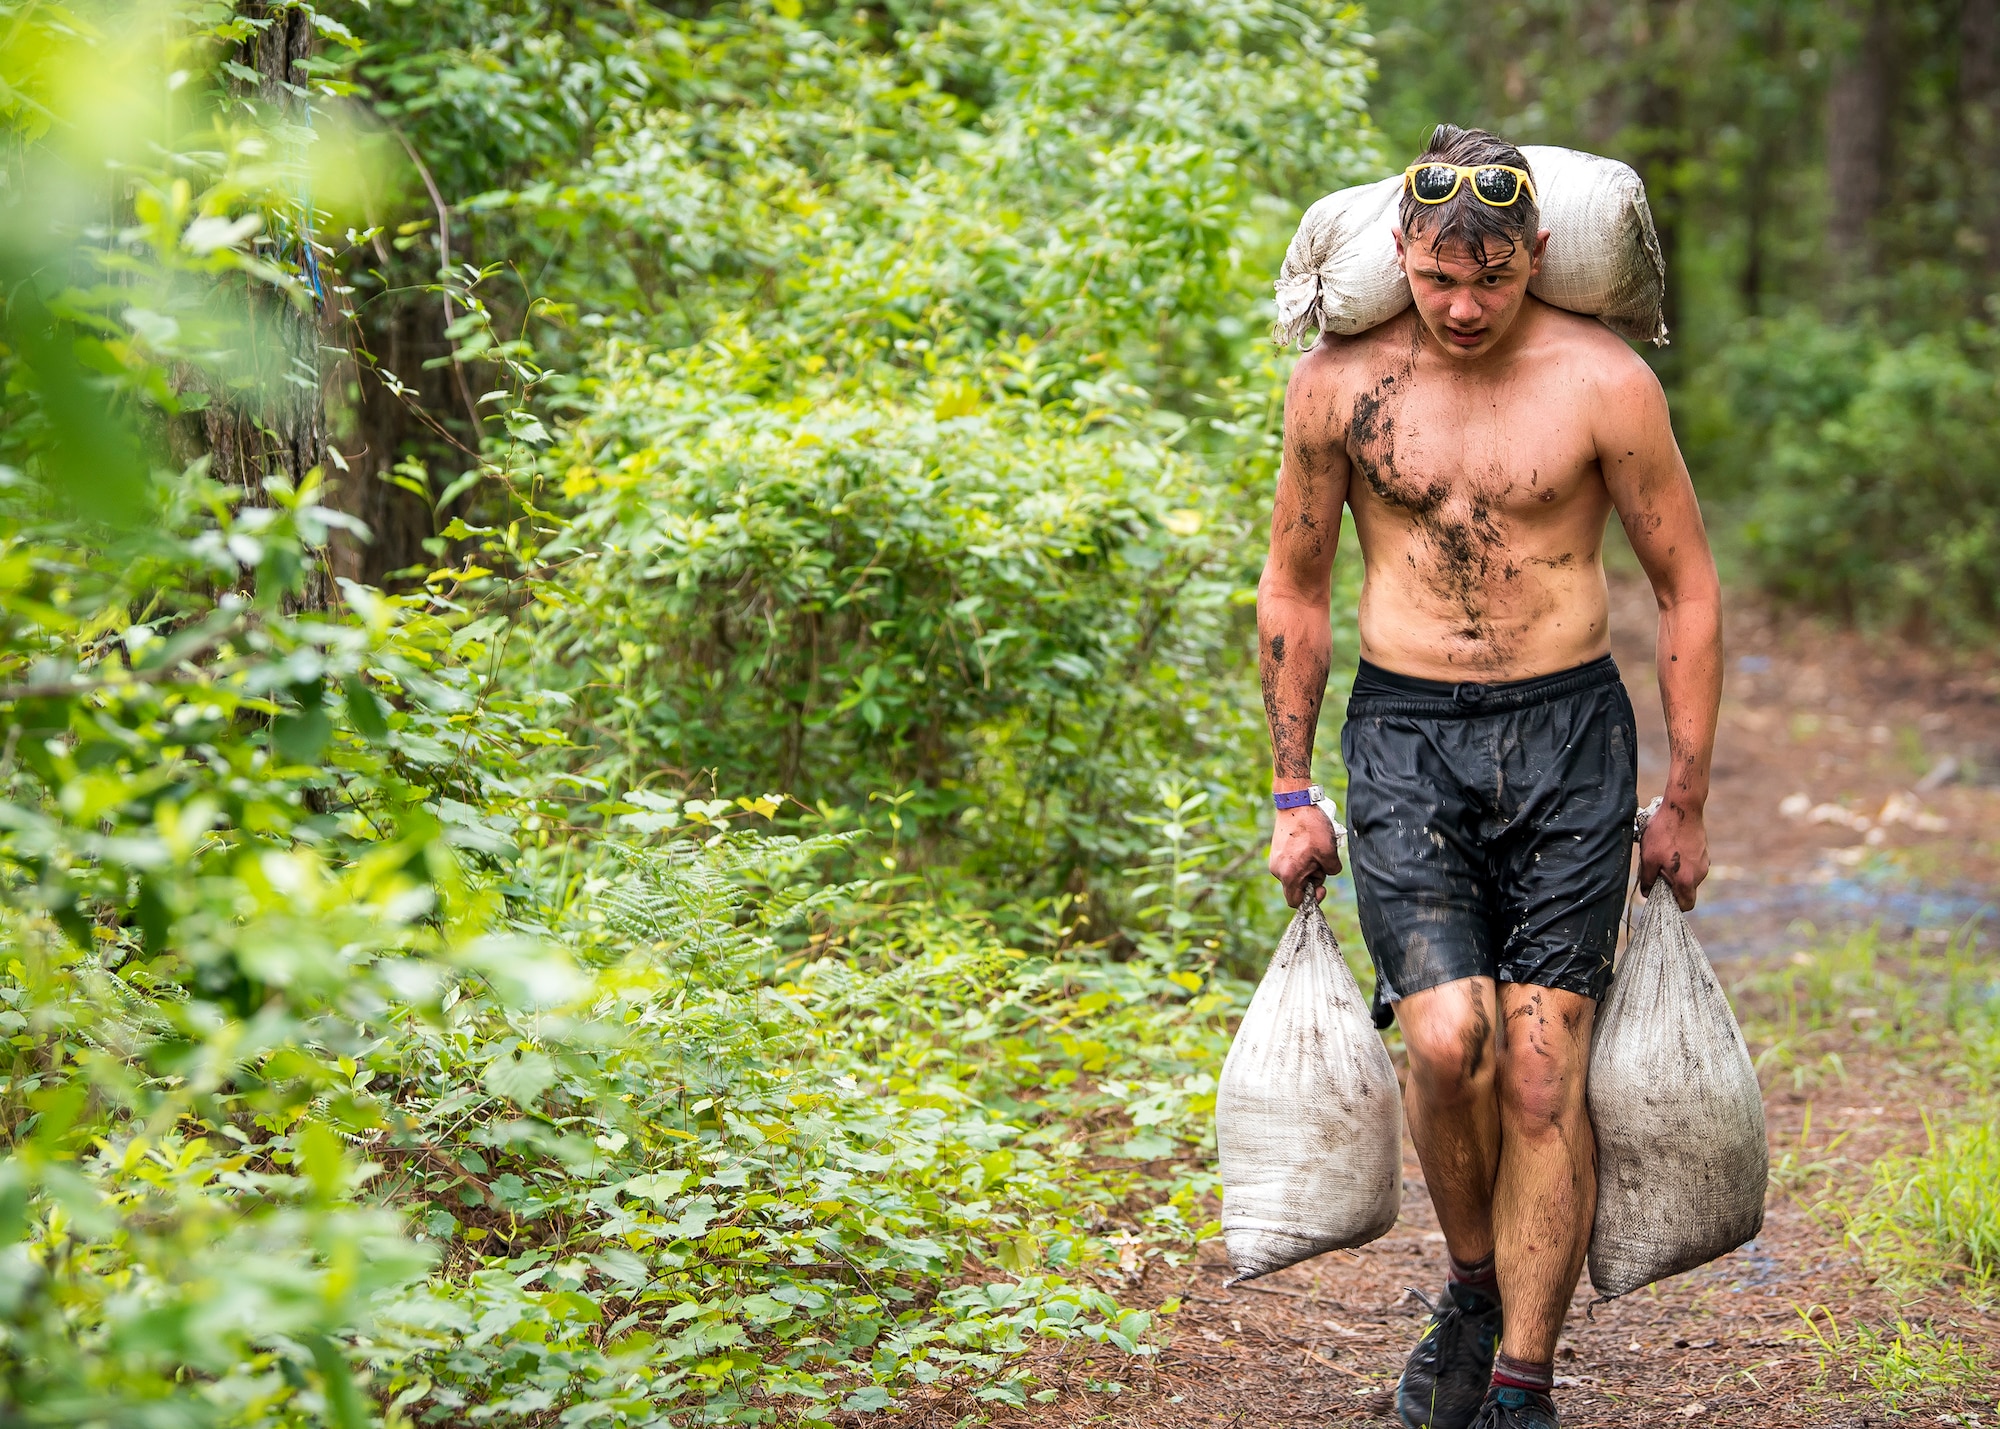 A Moody Mud Run participant carries sandbags, May 4, 2019, in Ray City, Ga. The sixth annual Mud Run had approximately 850 participants who had to overcome a series of obstacles on the 4 and 5-mile courses. The 32-obstacle course gave Airmen, families and the local community an opportunity to build camaraderie and teamwork skills. (U.S. Air Force photo by Airman 1st Class Eugene Oliver)